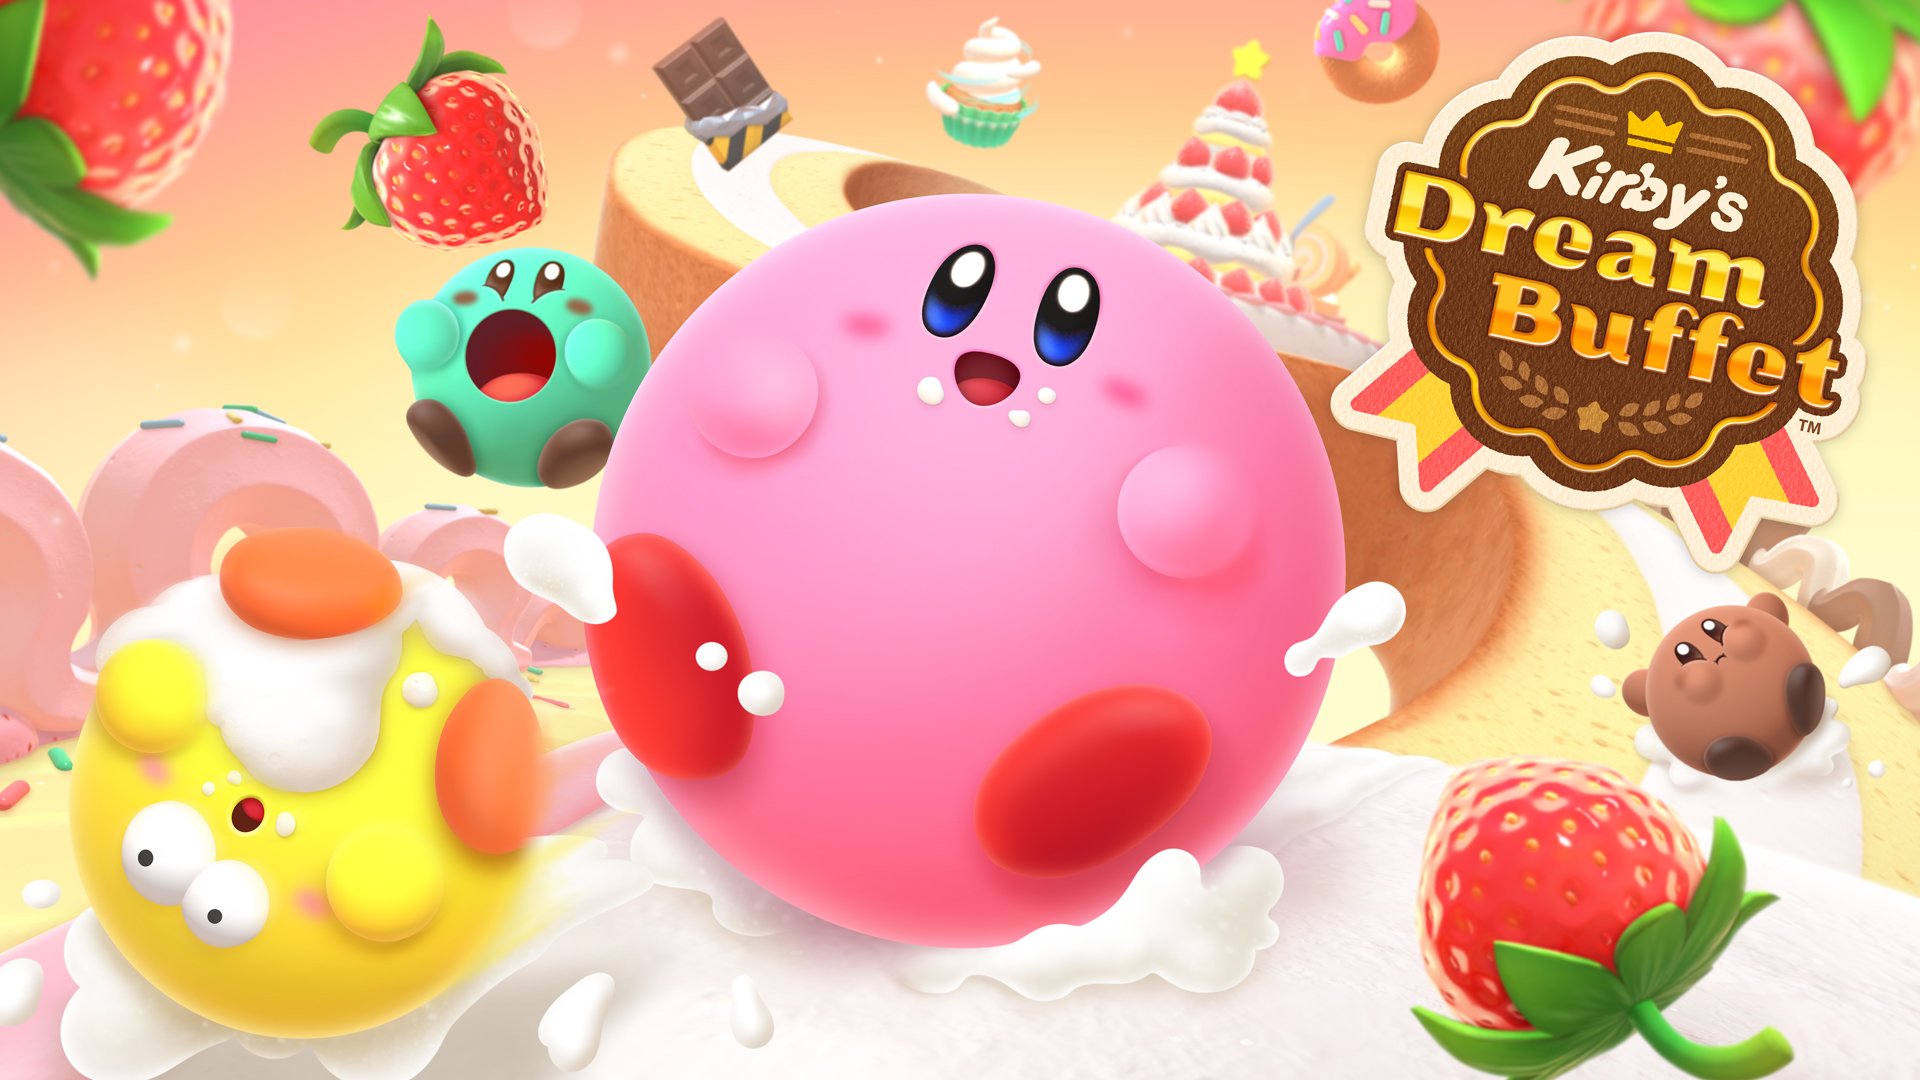 Nintendo announces multiplayer game Kirby's Dream Buffet for Switch | VGC